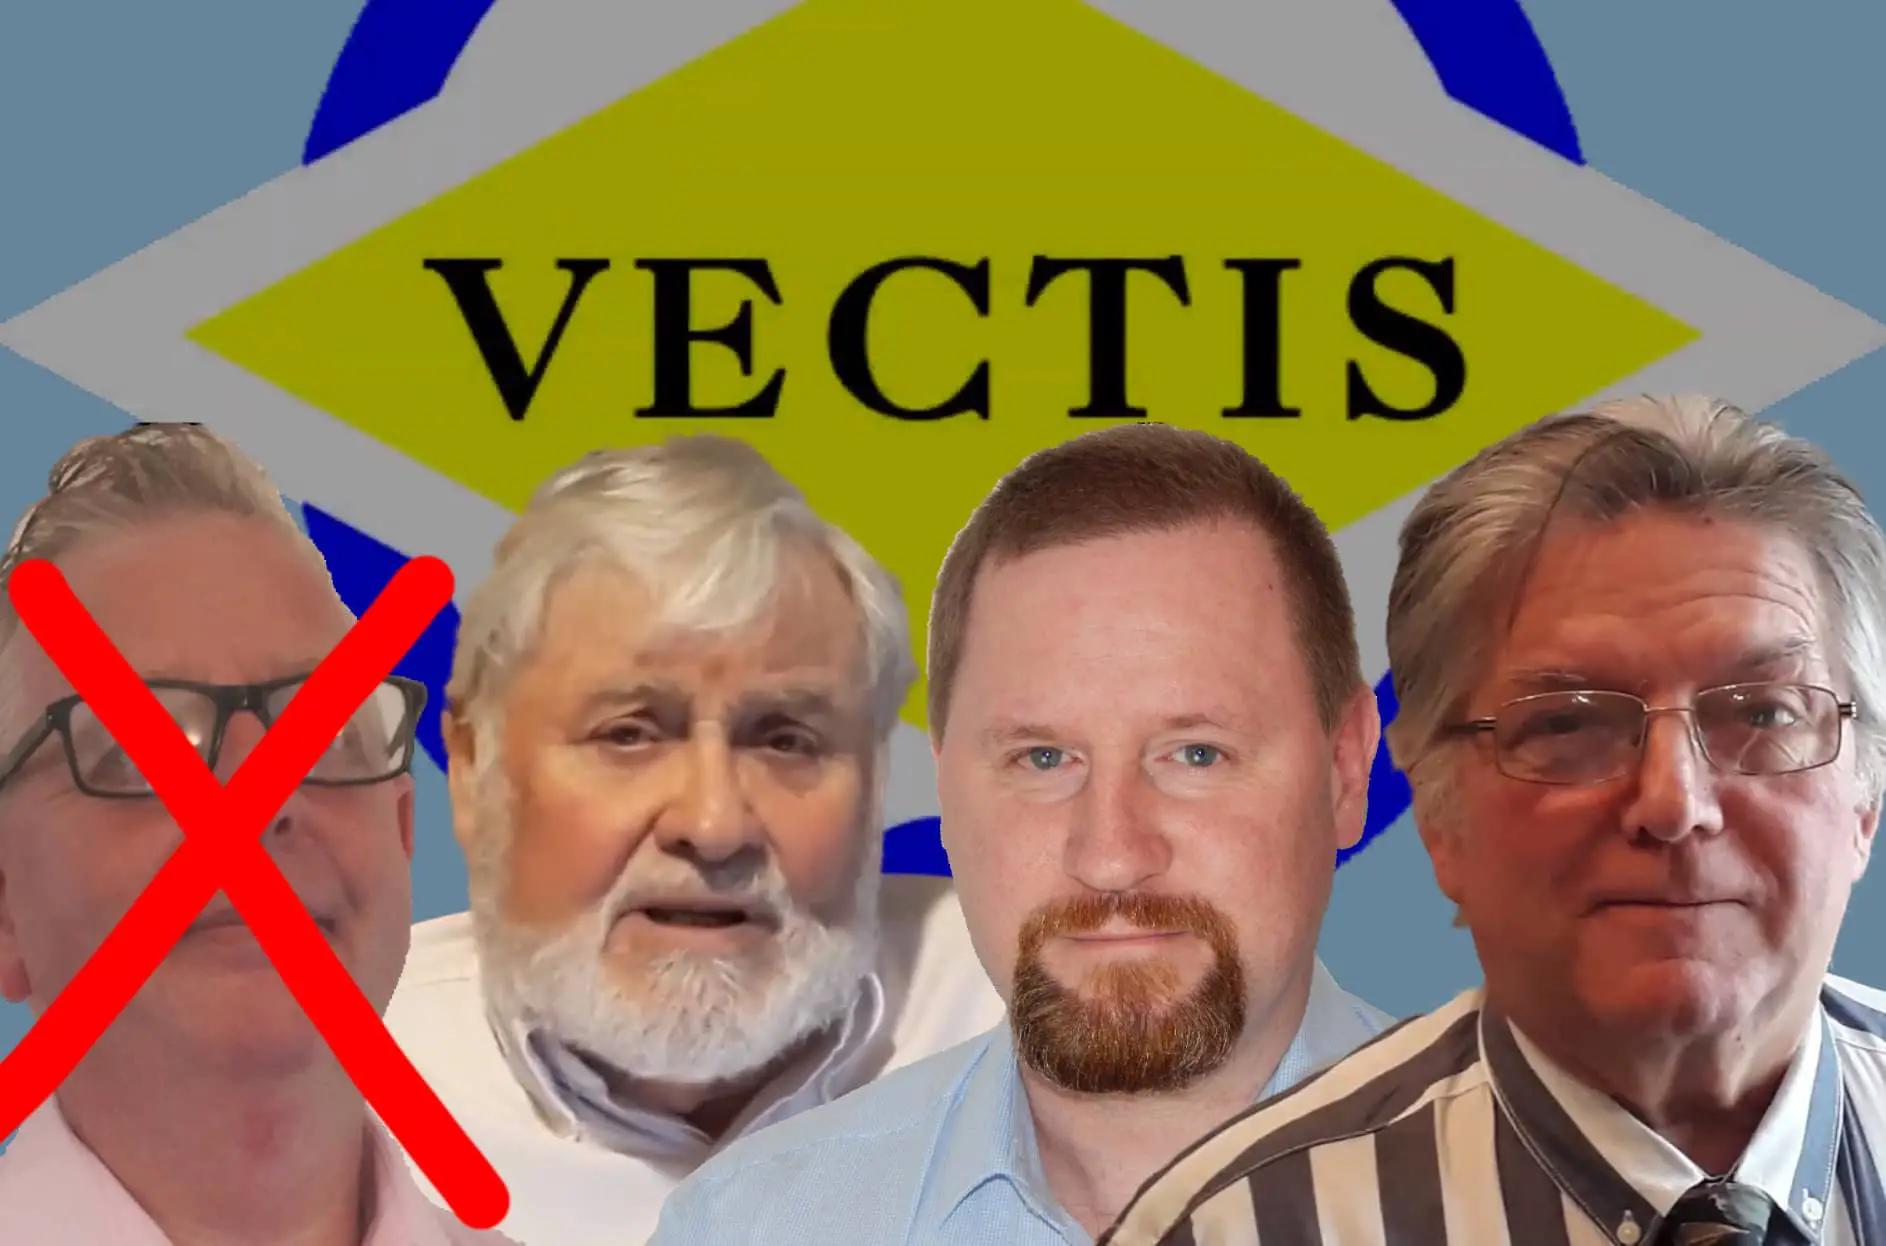 Julian Harris not a member of the Vectis party